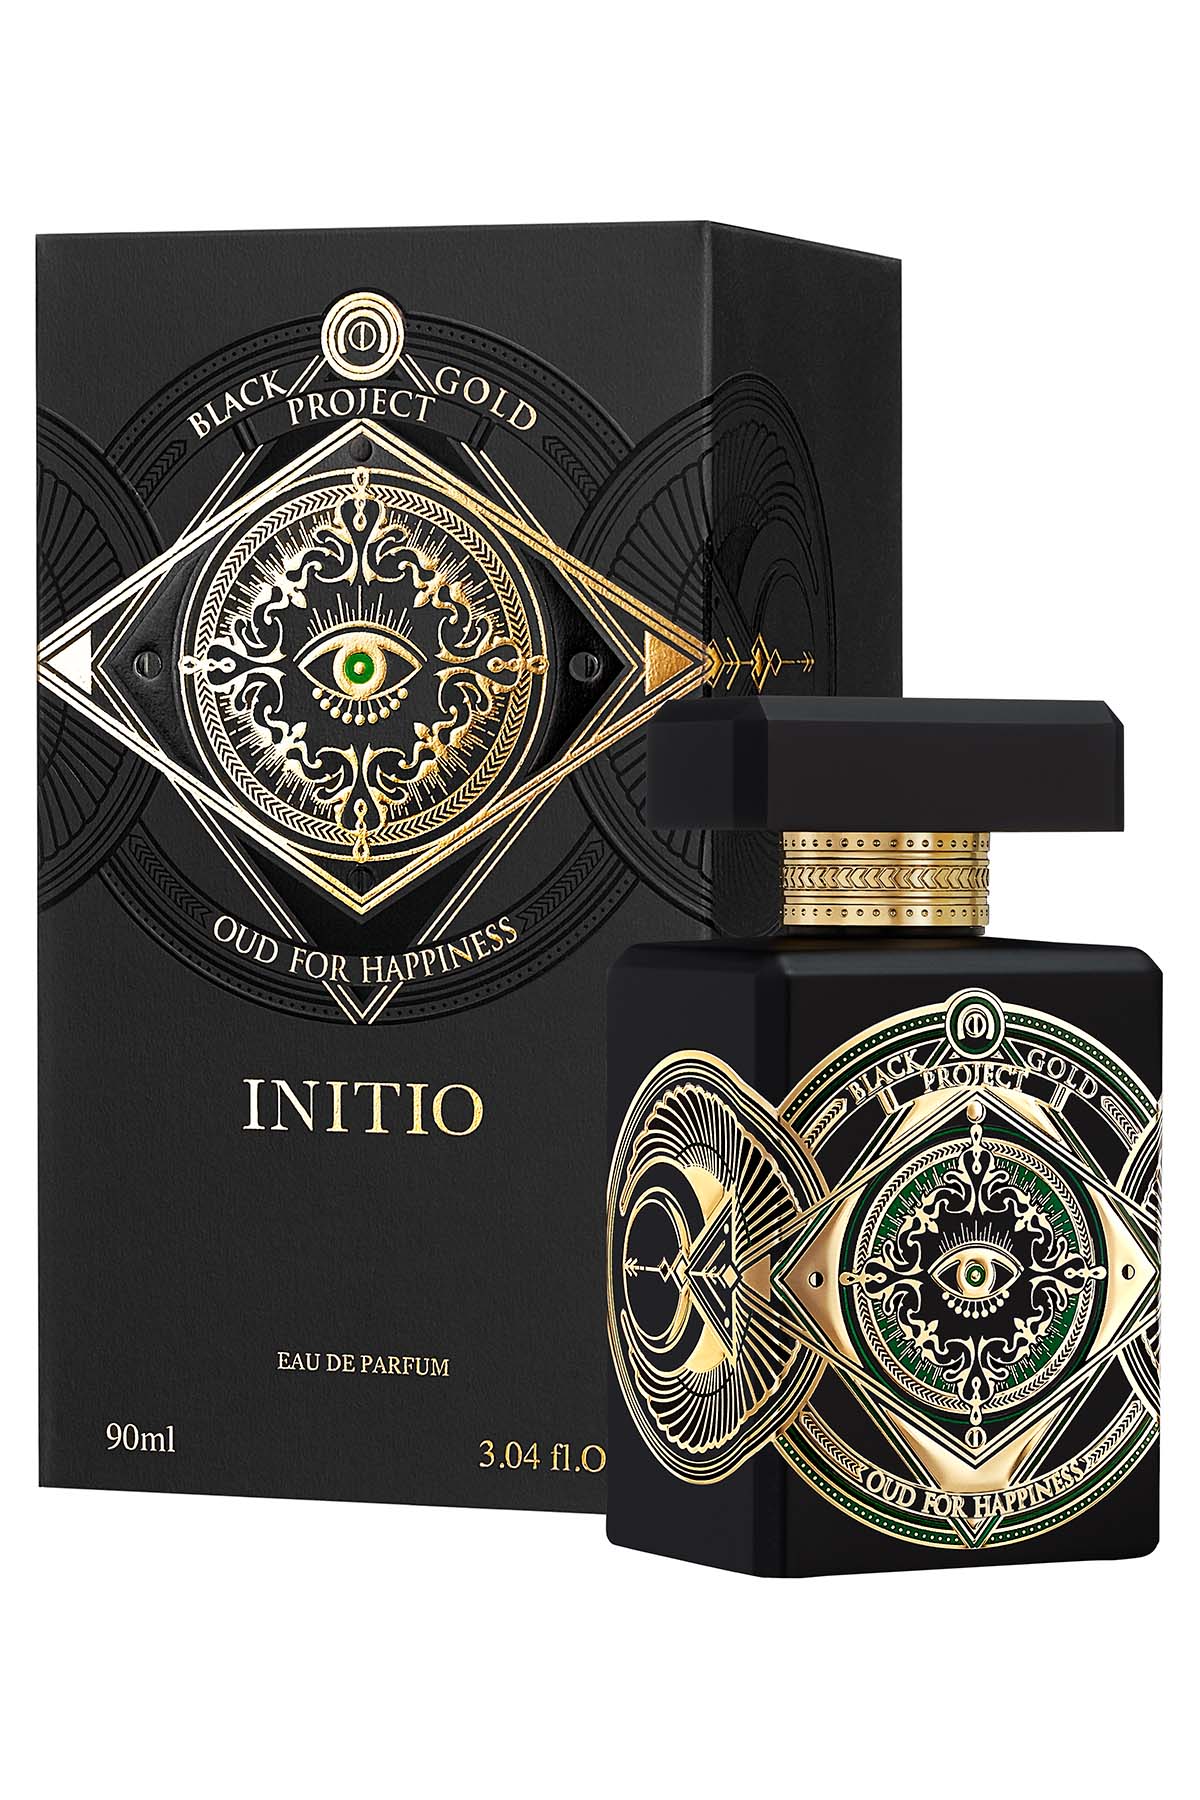 Initio Parfums Prives Black Gold Project